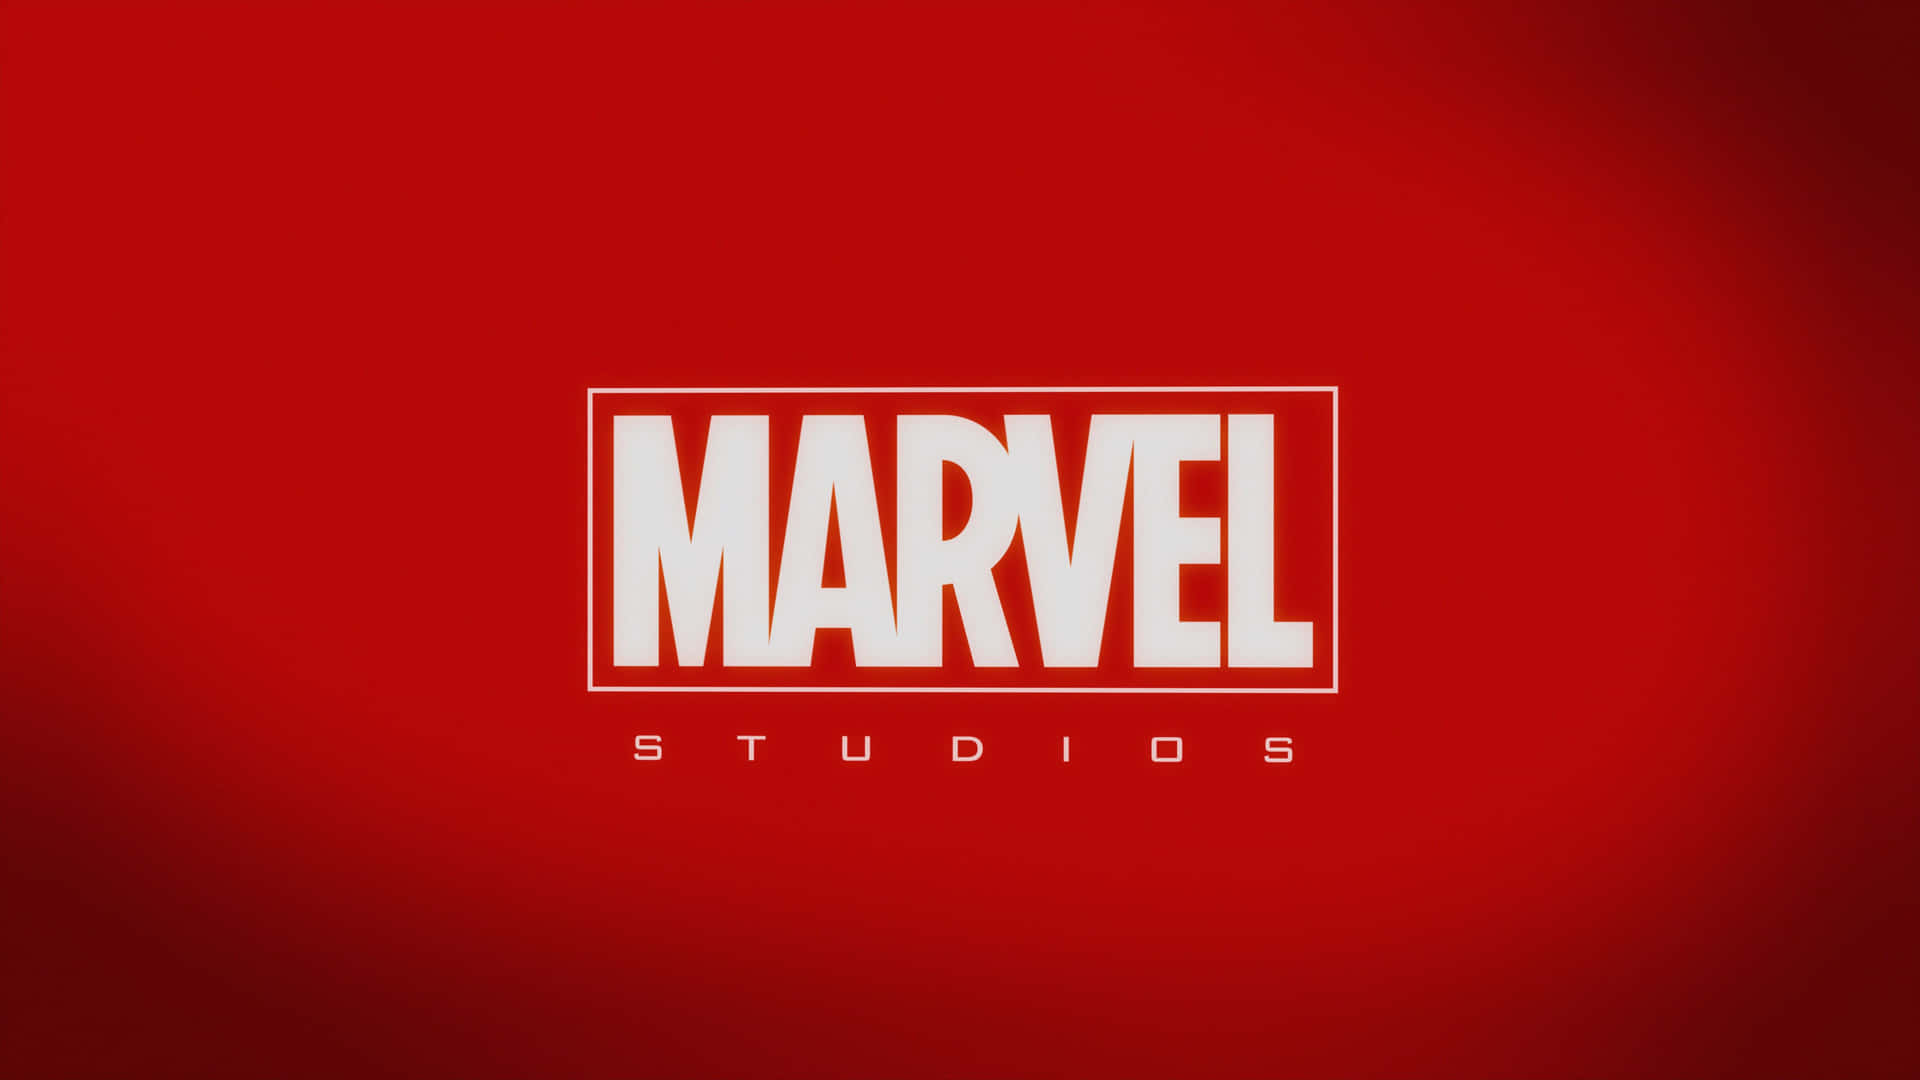 Upgrade your tech with the Marvel Ipad Wallpaper